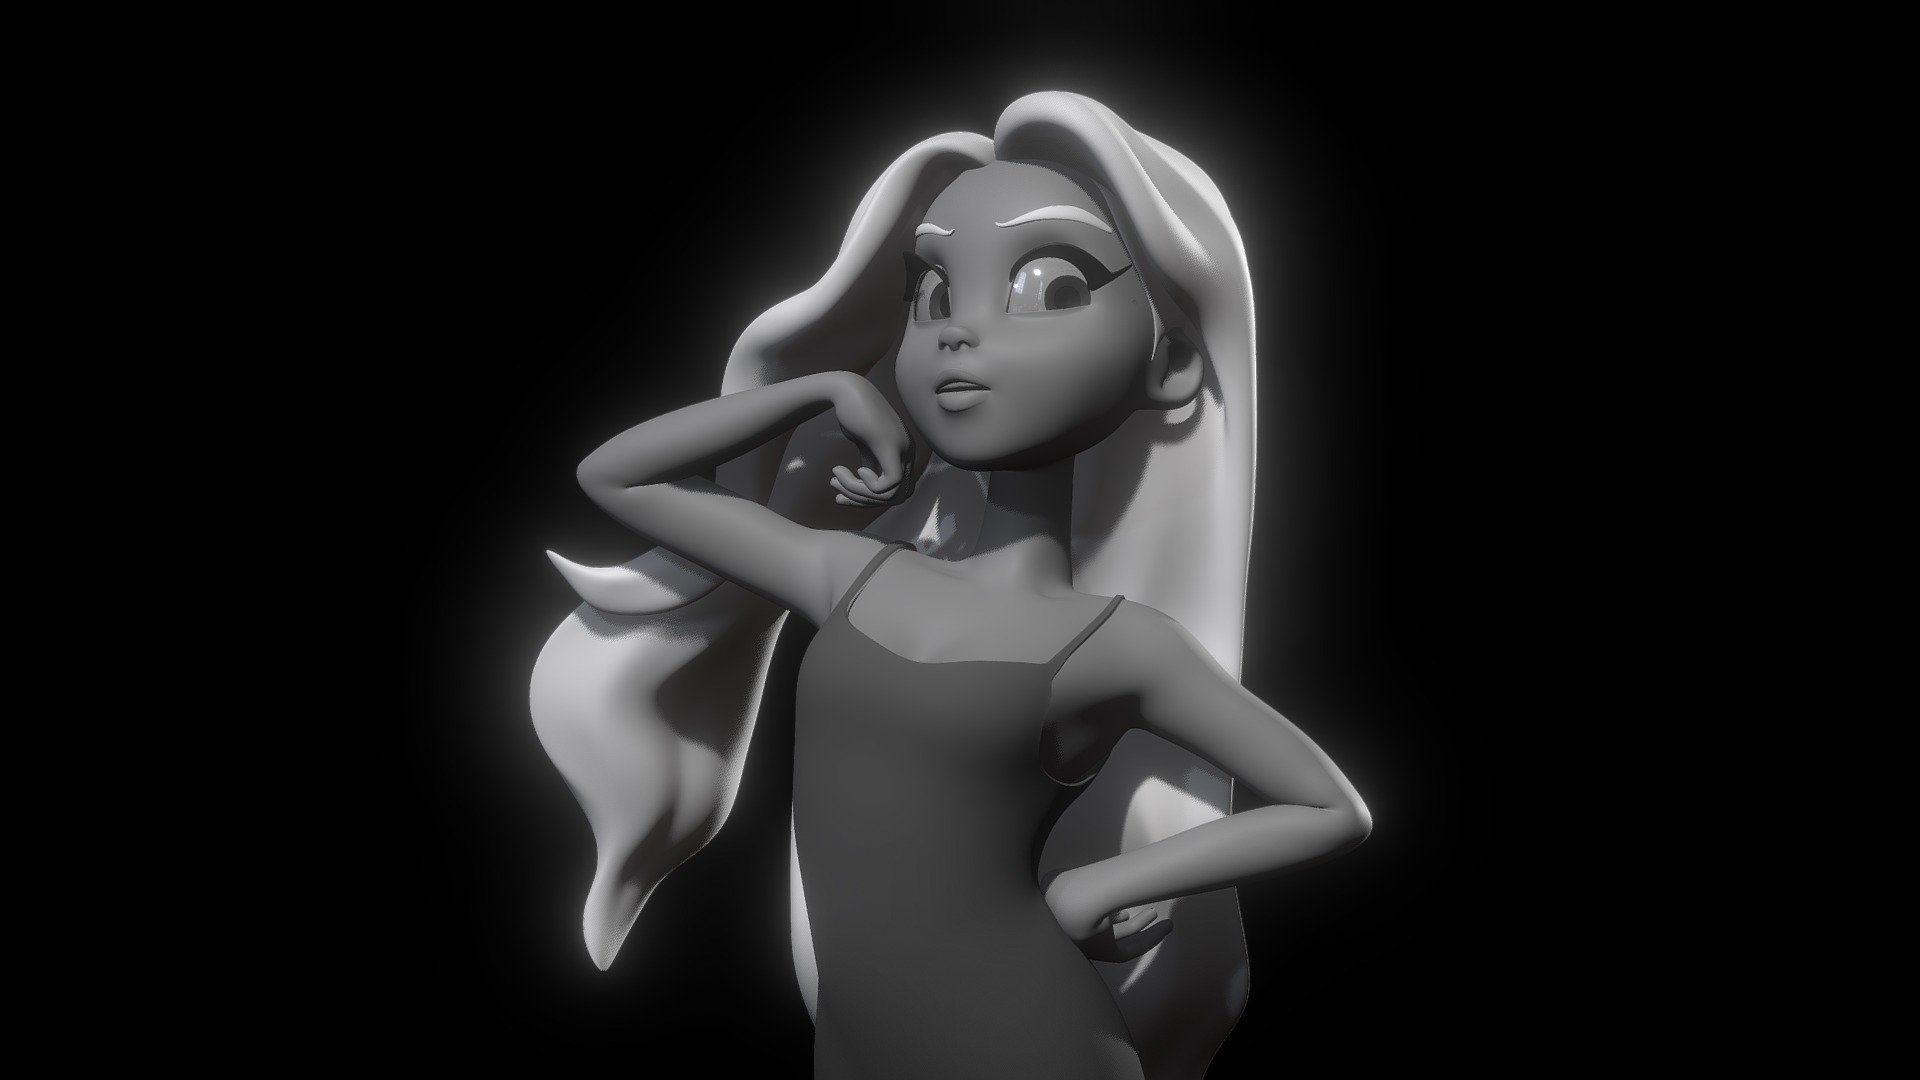 This is my work done during the Creating Appealing Characters in 3D course, with Dylan Ekren. in Mold3dAcademy.com
I've learned a lot in the last 8 weeks. 
Concept by Diana Marmol.

My Artsation:
https://www.artstation.com/migueldelgado - Daphne - 3D model by Miguel Delgado (@migueldelgado) 3d model